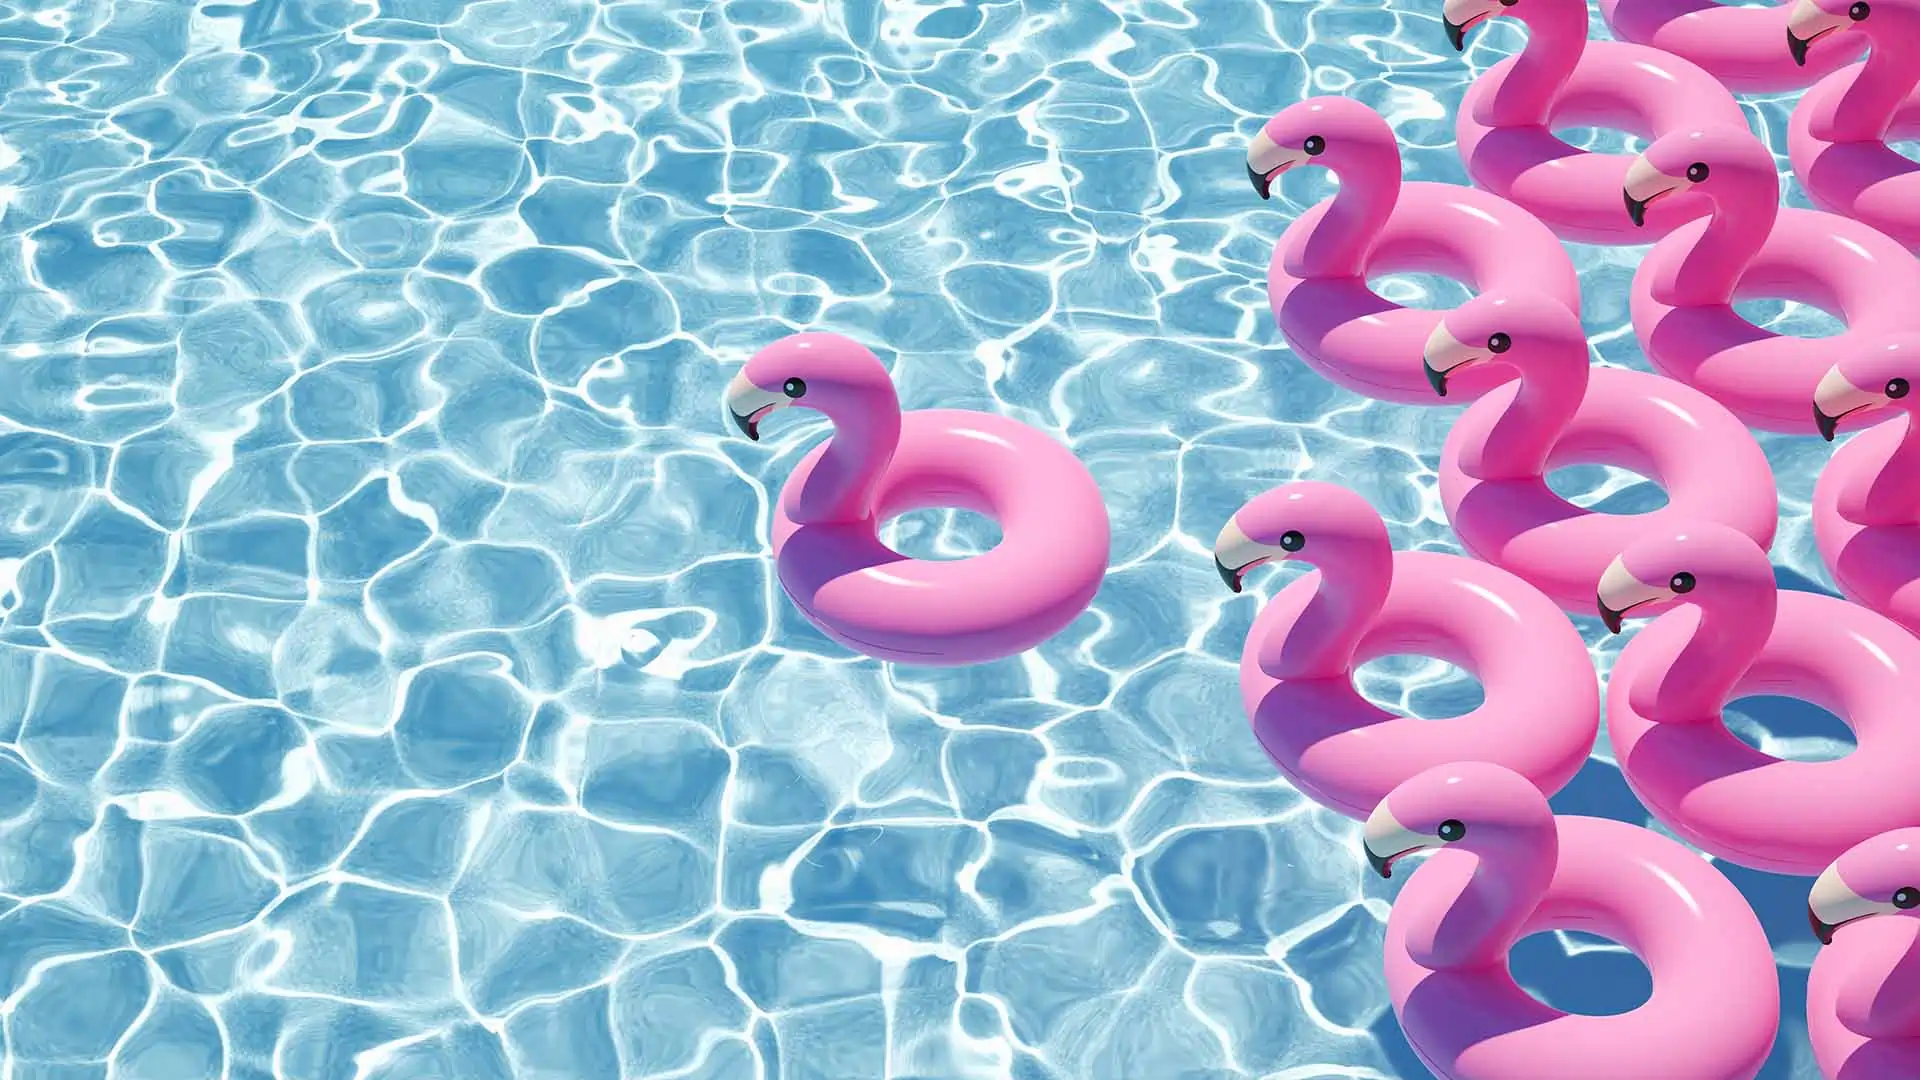 Flock of inflatable pool flamingos in the pool of a summer home.